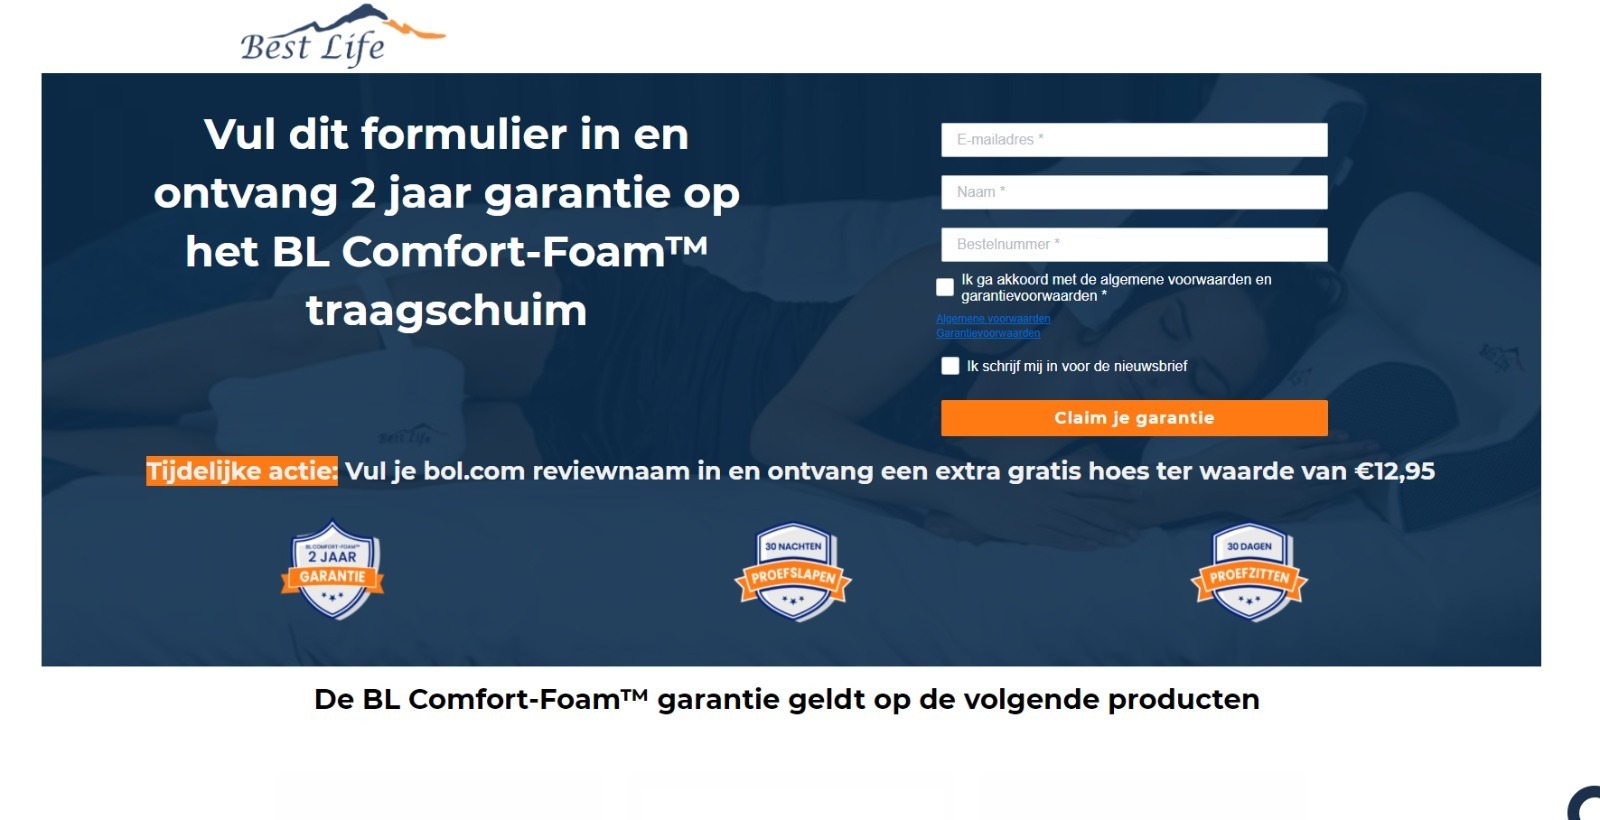 schuld Discriminerend tuin How to add hyperlink general terms and conditions in sign up form |  Community